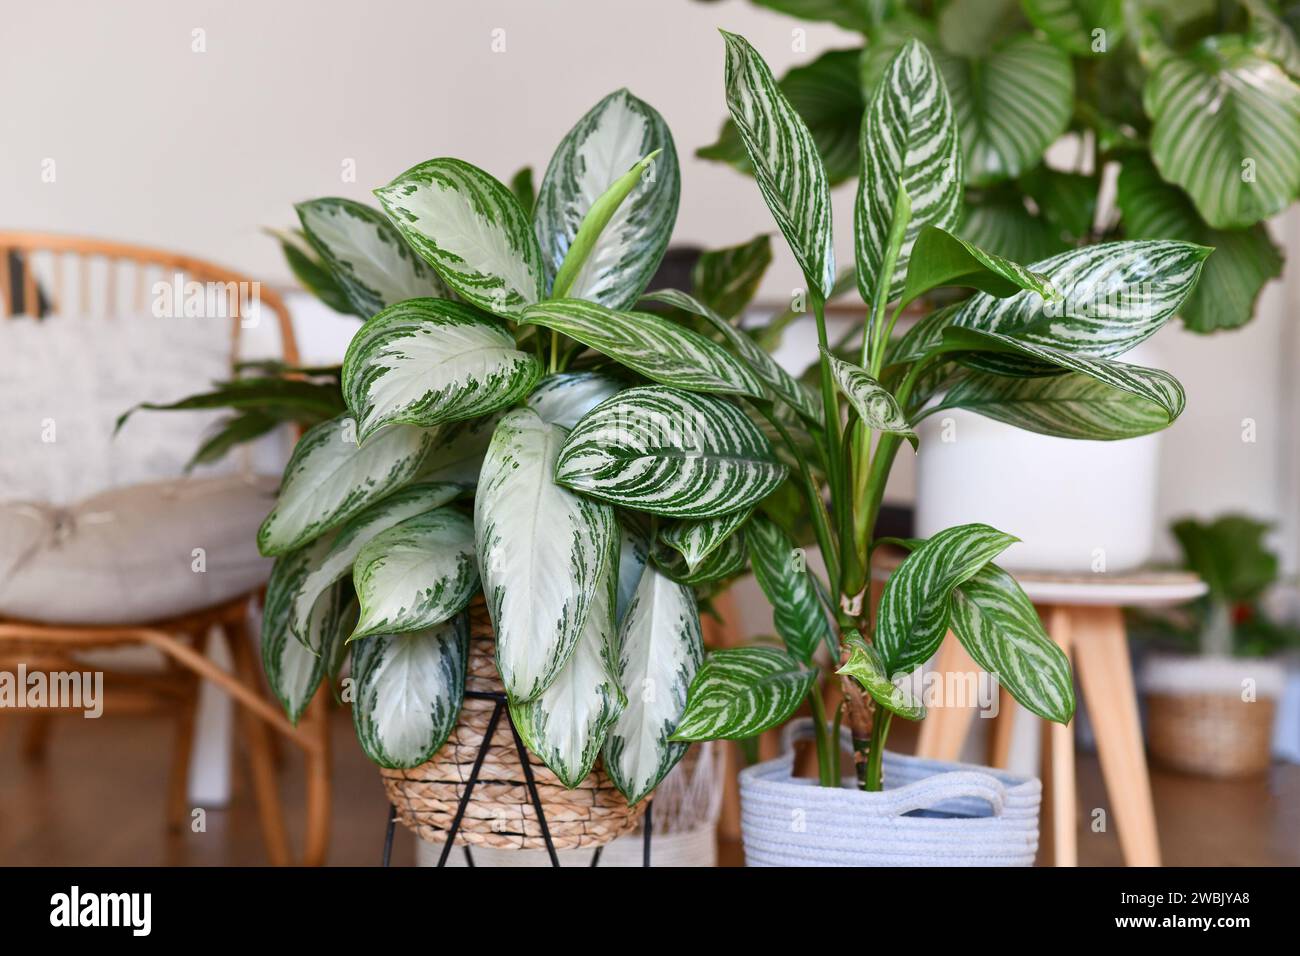 Potted tropical 'Aglaonema Silver Bay' houseplant with silver pattern in basket with other houseplants in blurry background Stock Photo